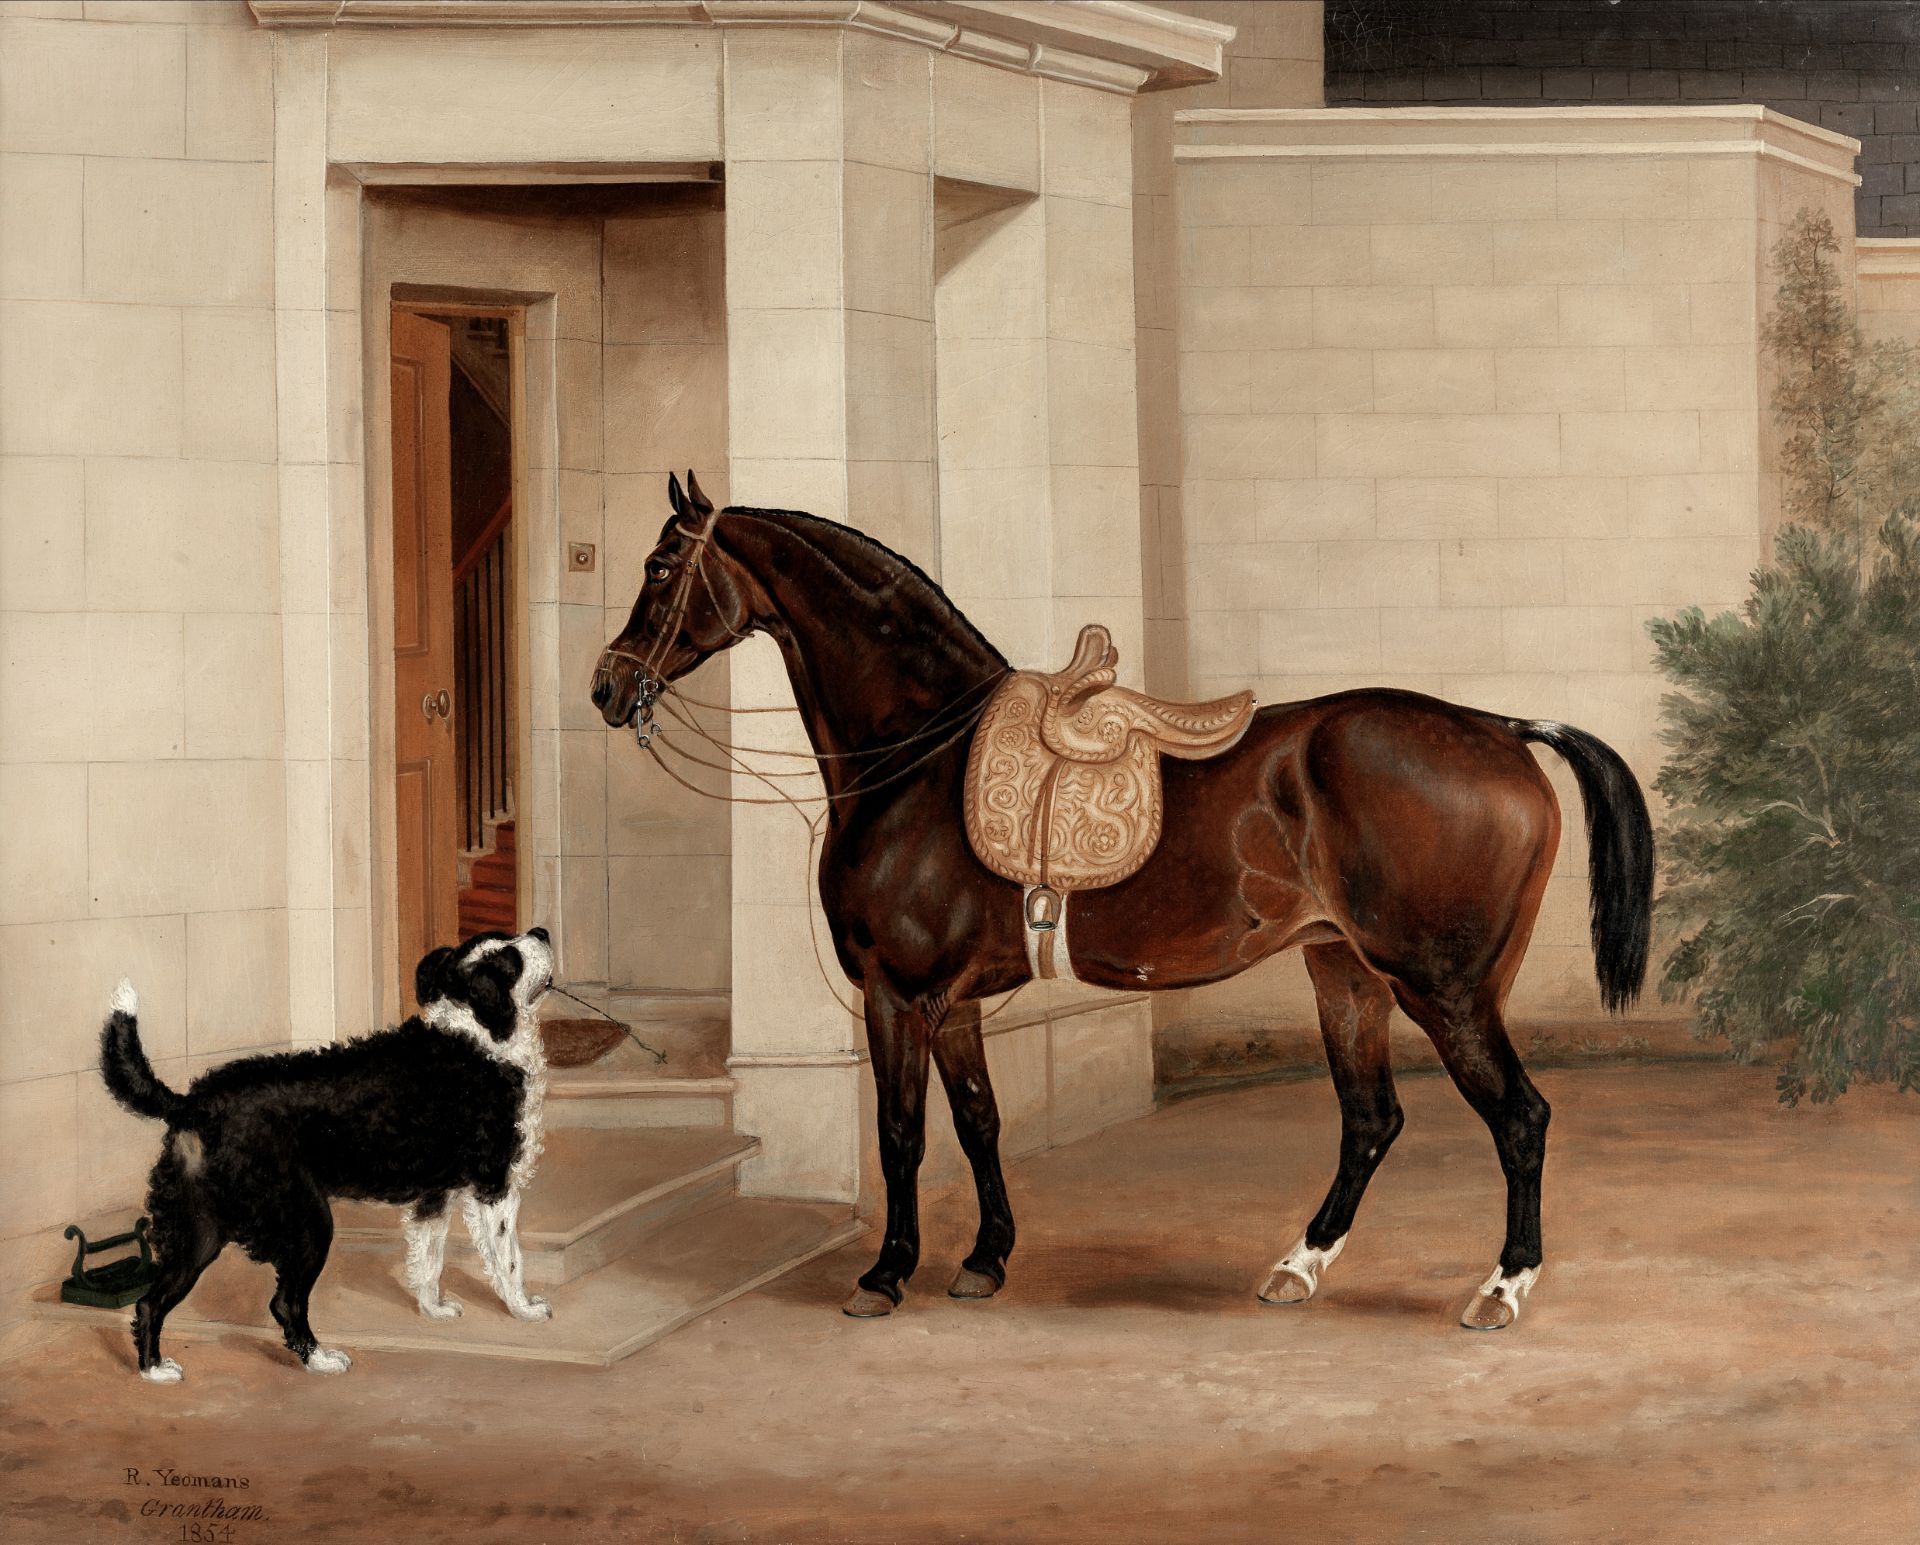 R. Yeomans (British, 19th century) A horse greeted by a dog